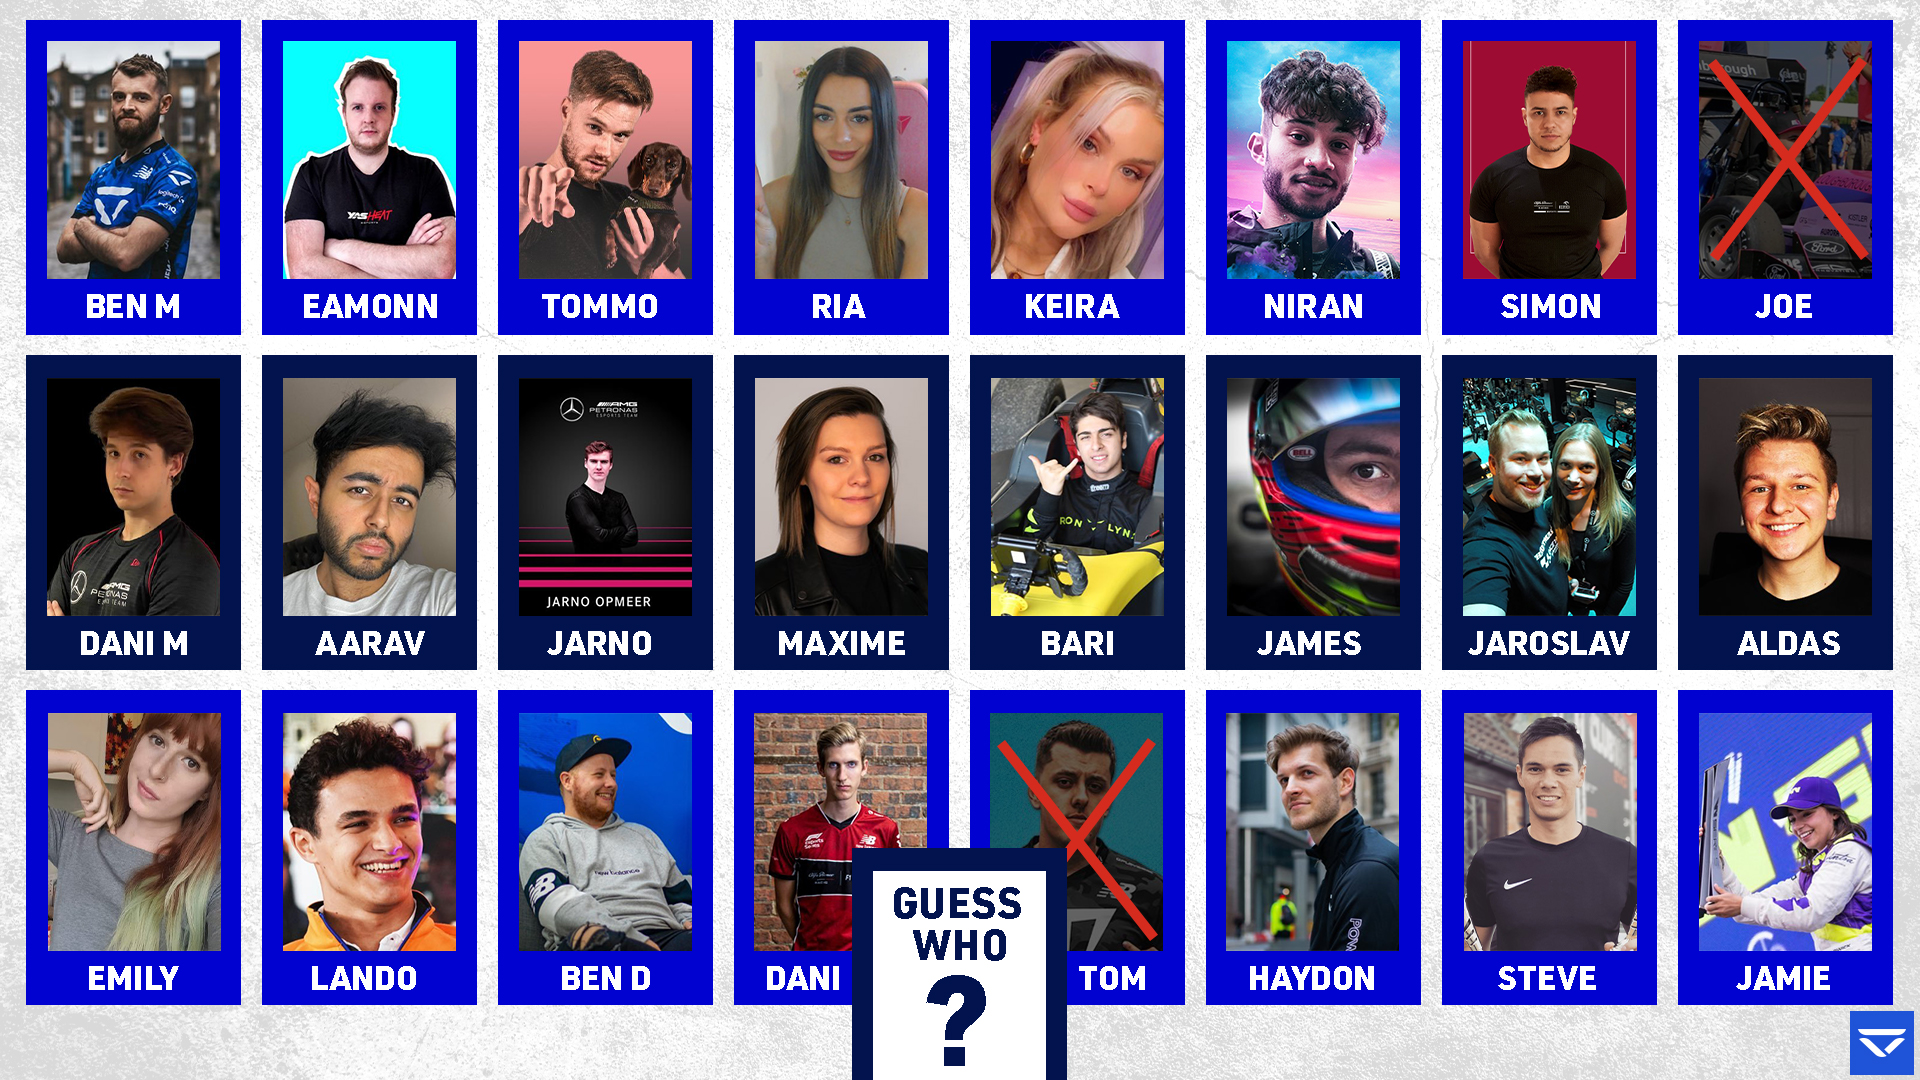 Veloce on Twitter: "It's Guess time! Guess the person photos first and win a lollypop 🍭 As before, we will be keeping tabs on all your guesses throughout